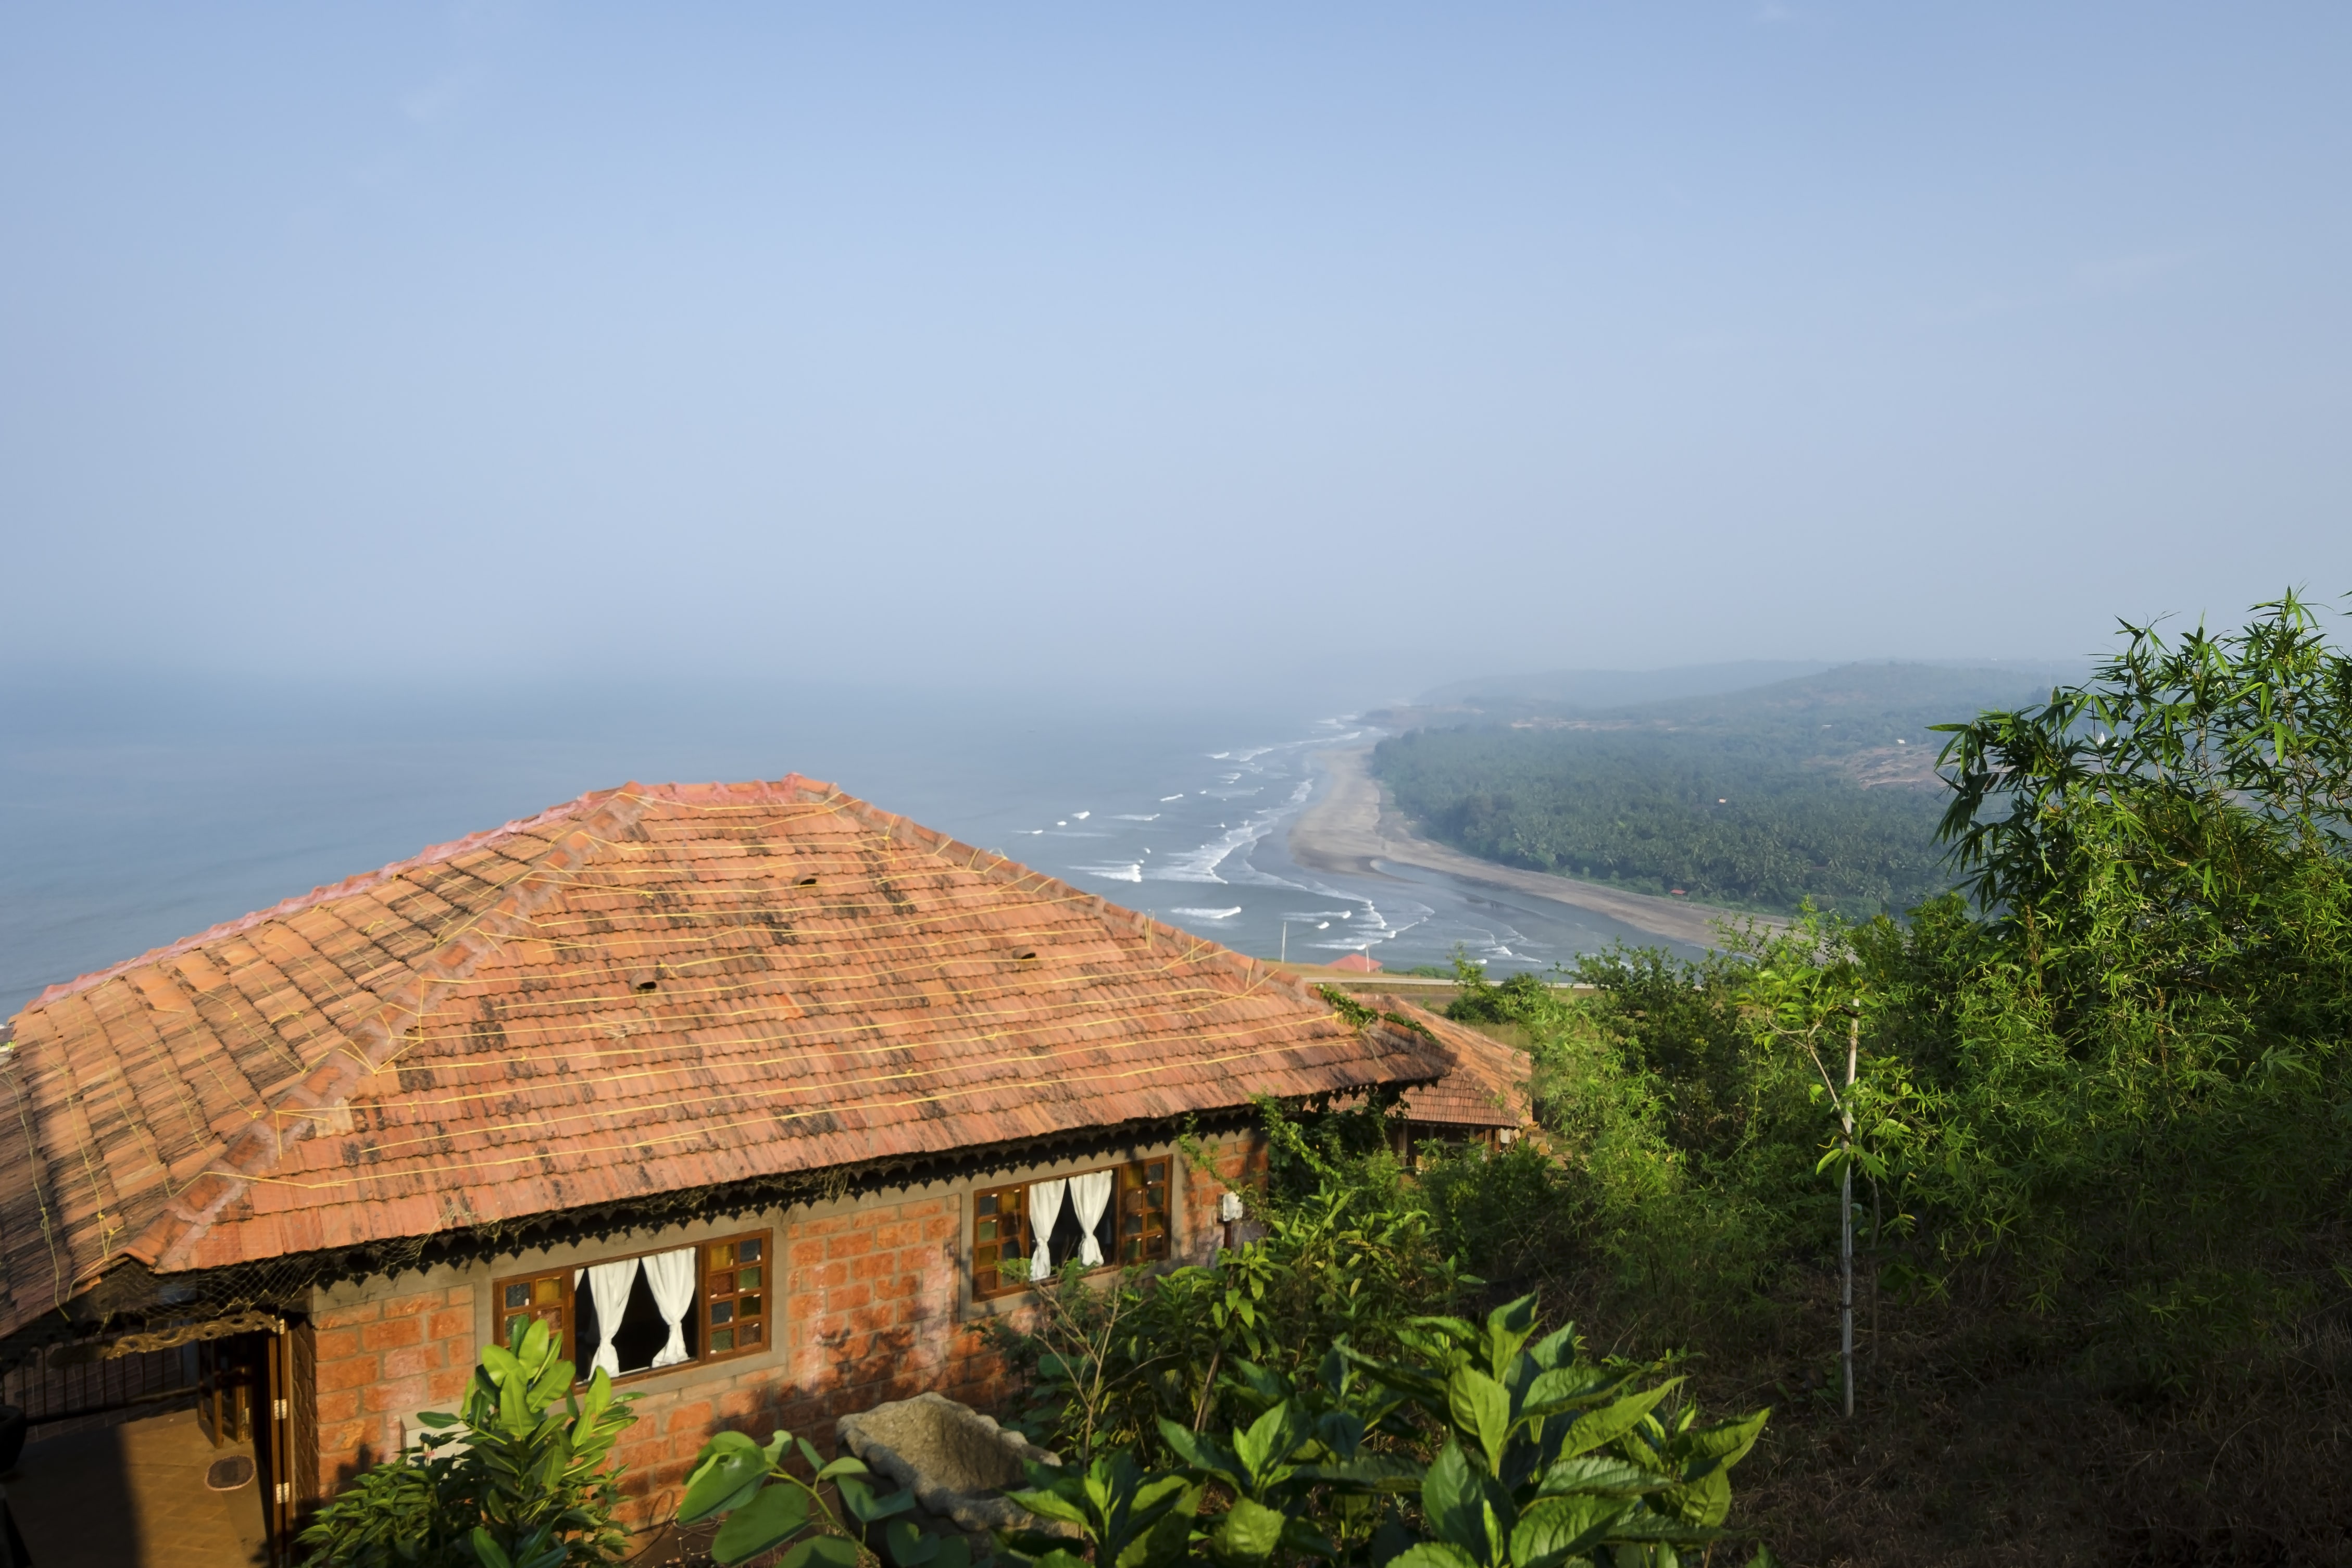 Let the breeze at this sea facing villa in Dapoli calm your soul.